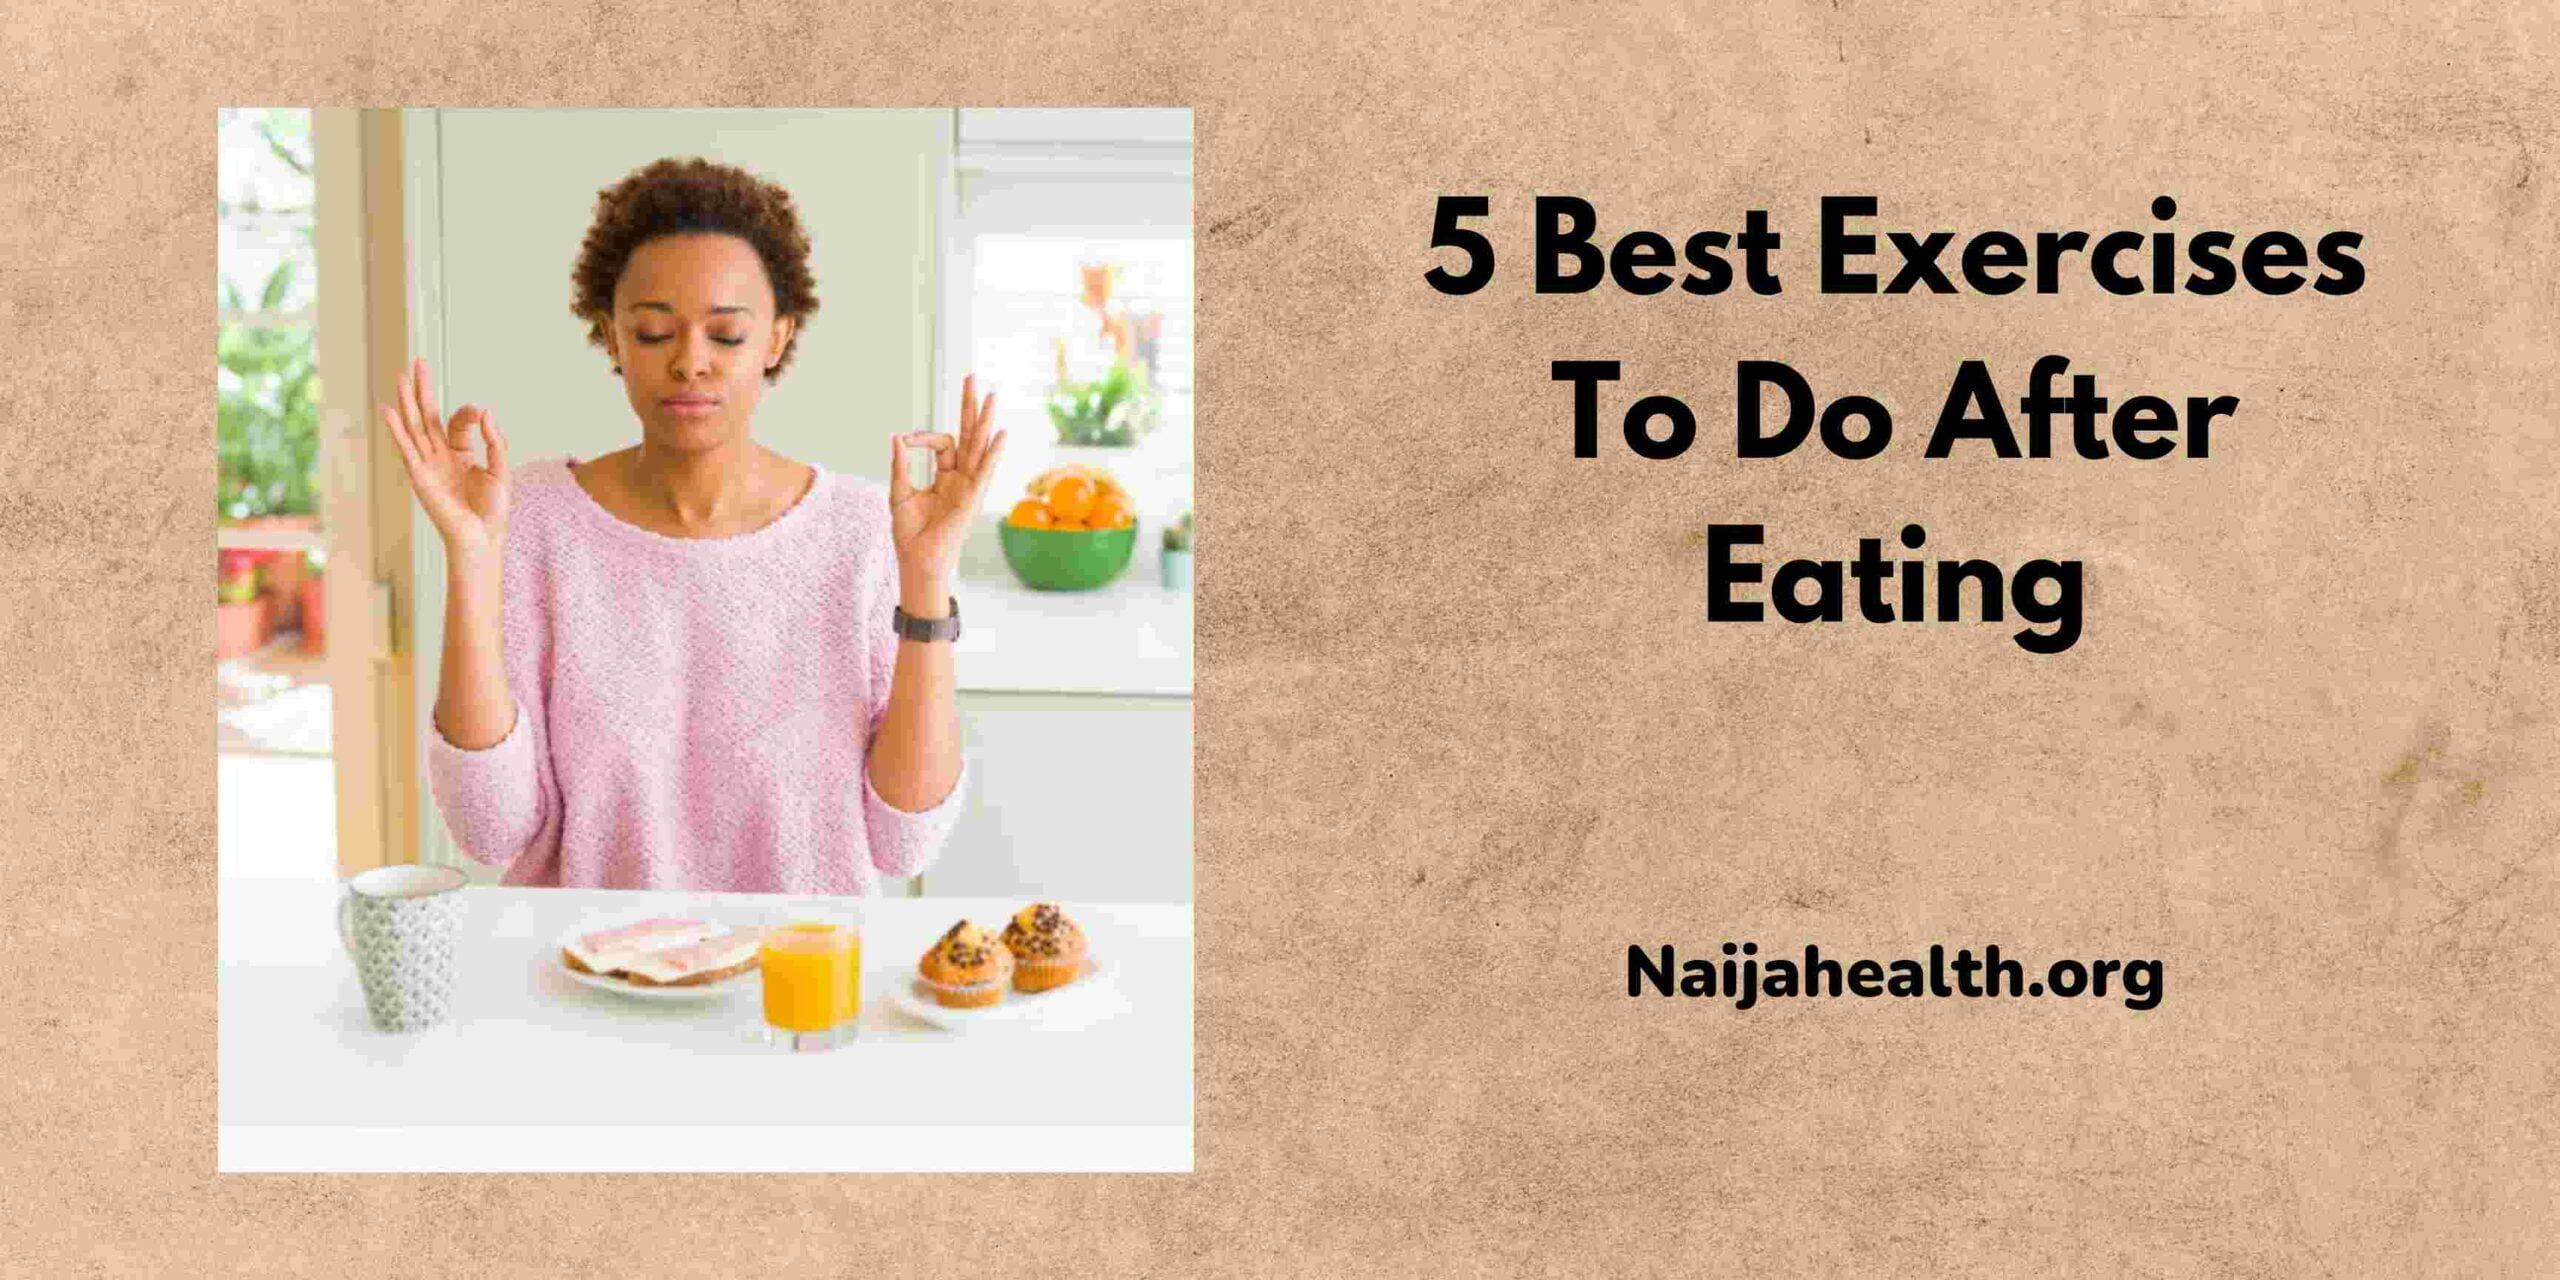 5 Best Exercises To Do After Eating